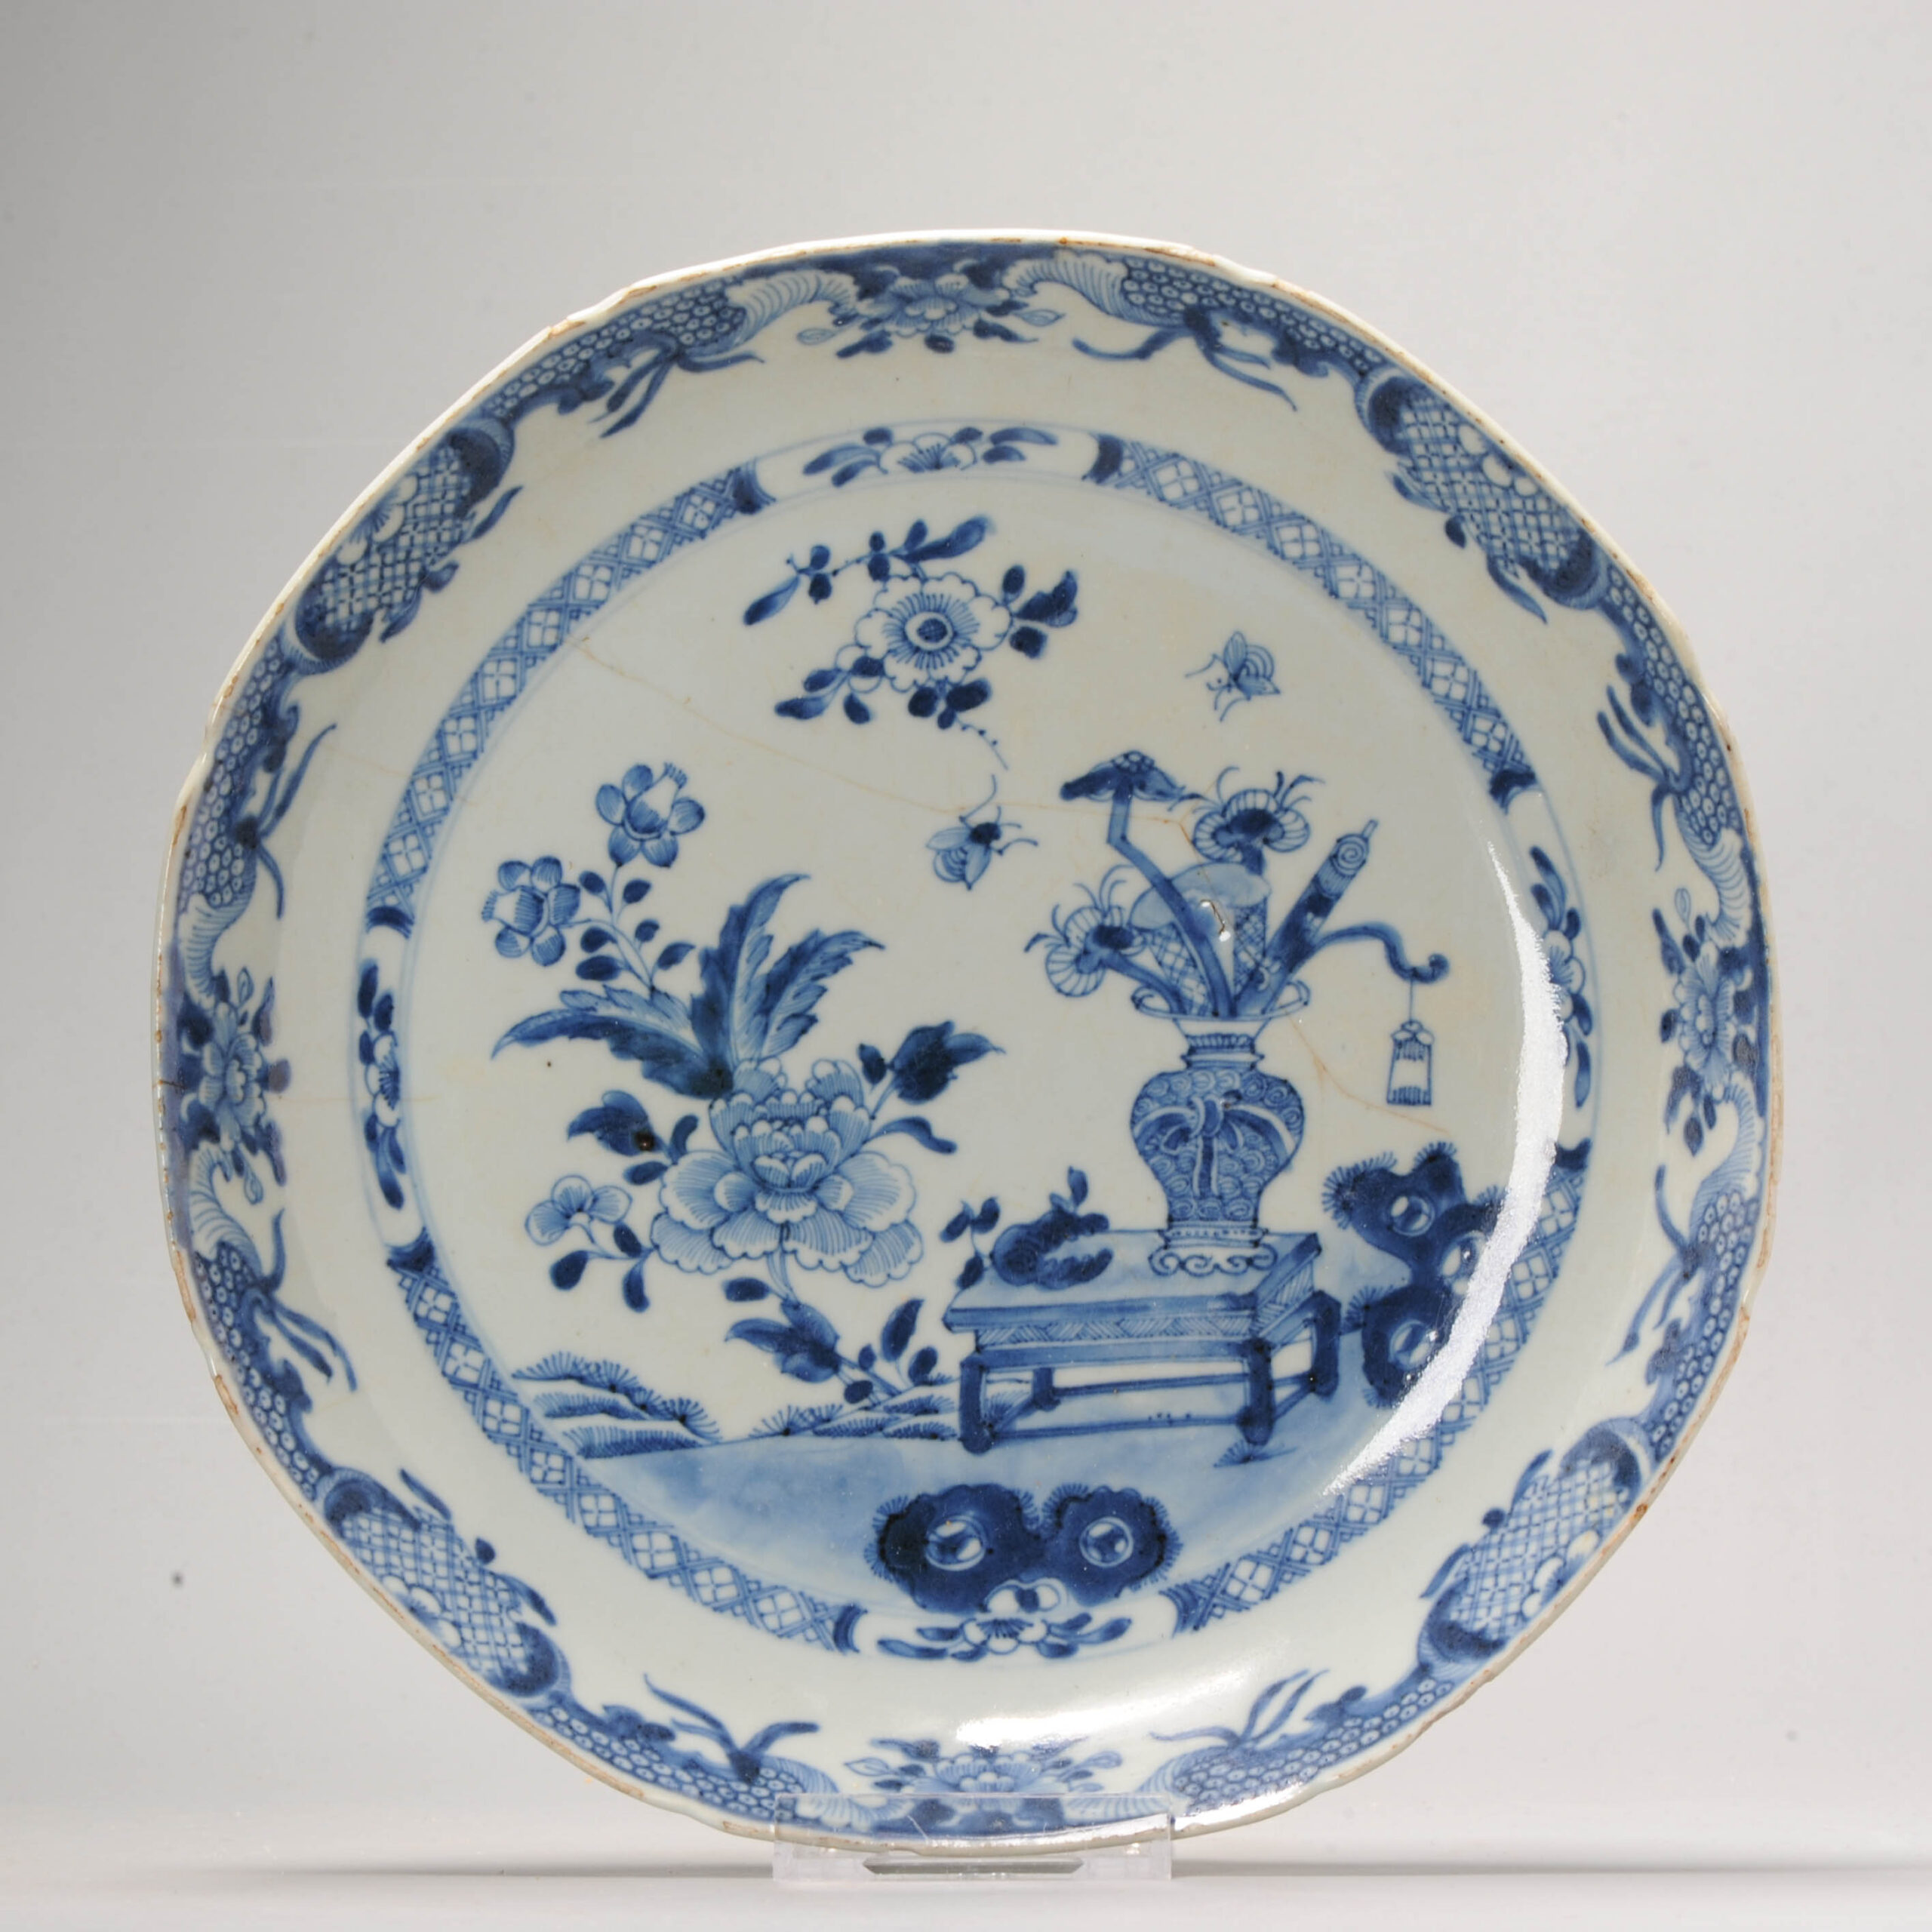 A Yonzheng Qianlong Chinese Porcelain Blue and White Charger Plate 1740 China